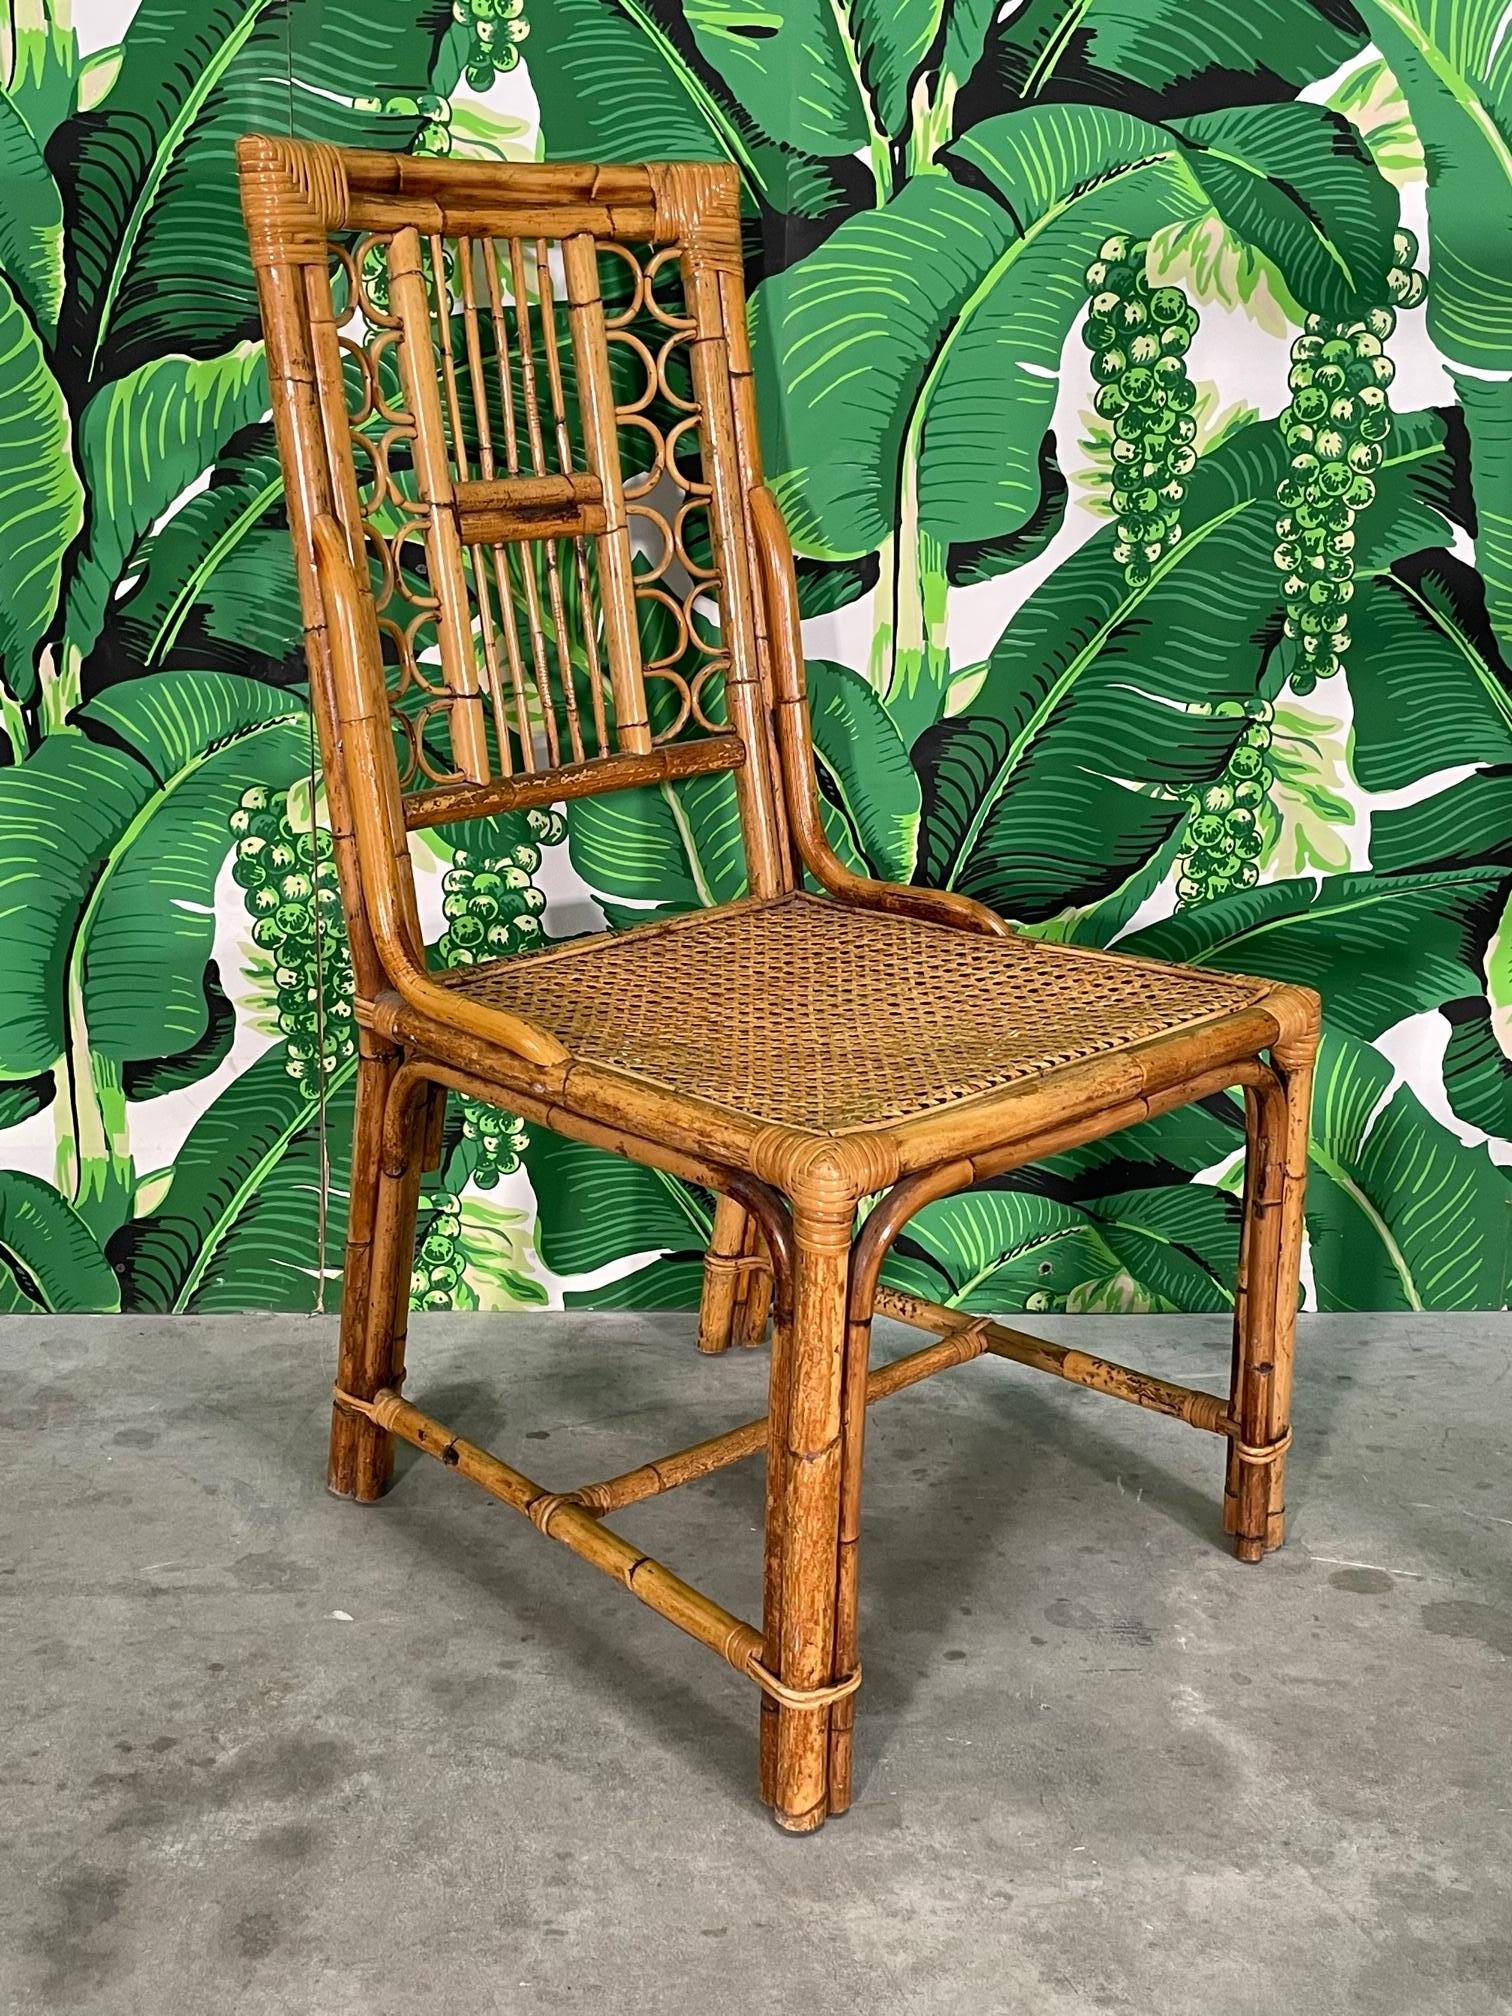 Set of six rattan dining chairs feature detailed fretwork and cane seats. Good condition with imperfections consistent with age. May exhibit scuffs, marks, or wear, see photos for details.

  